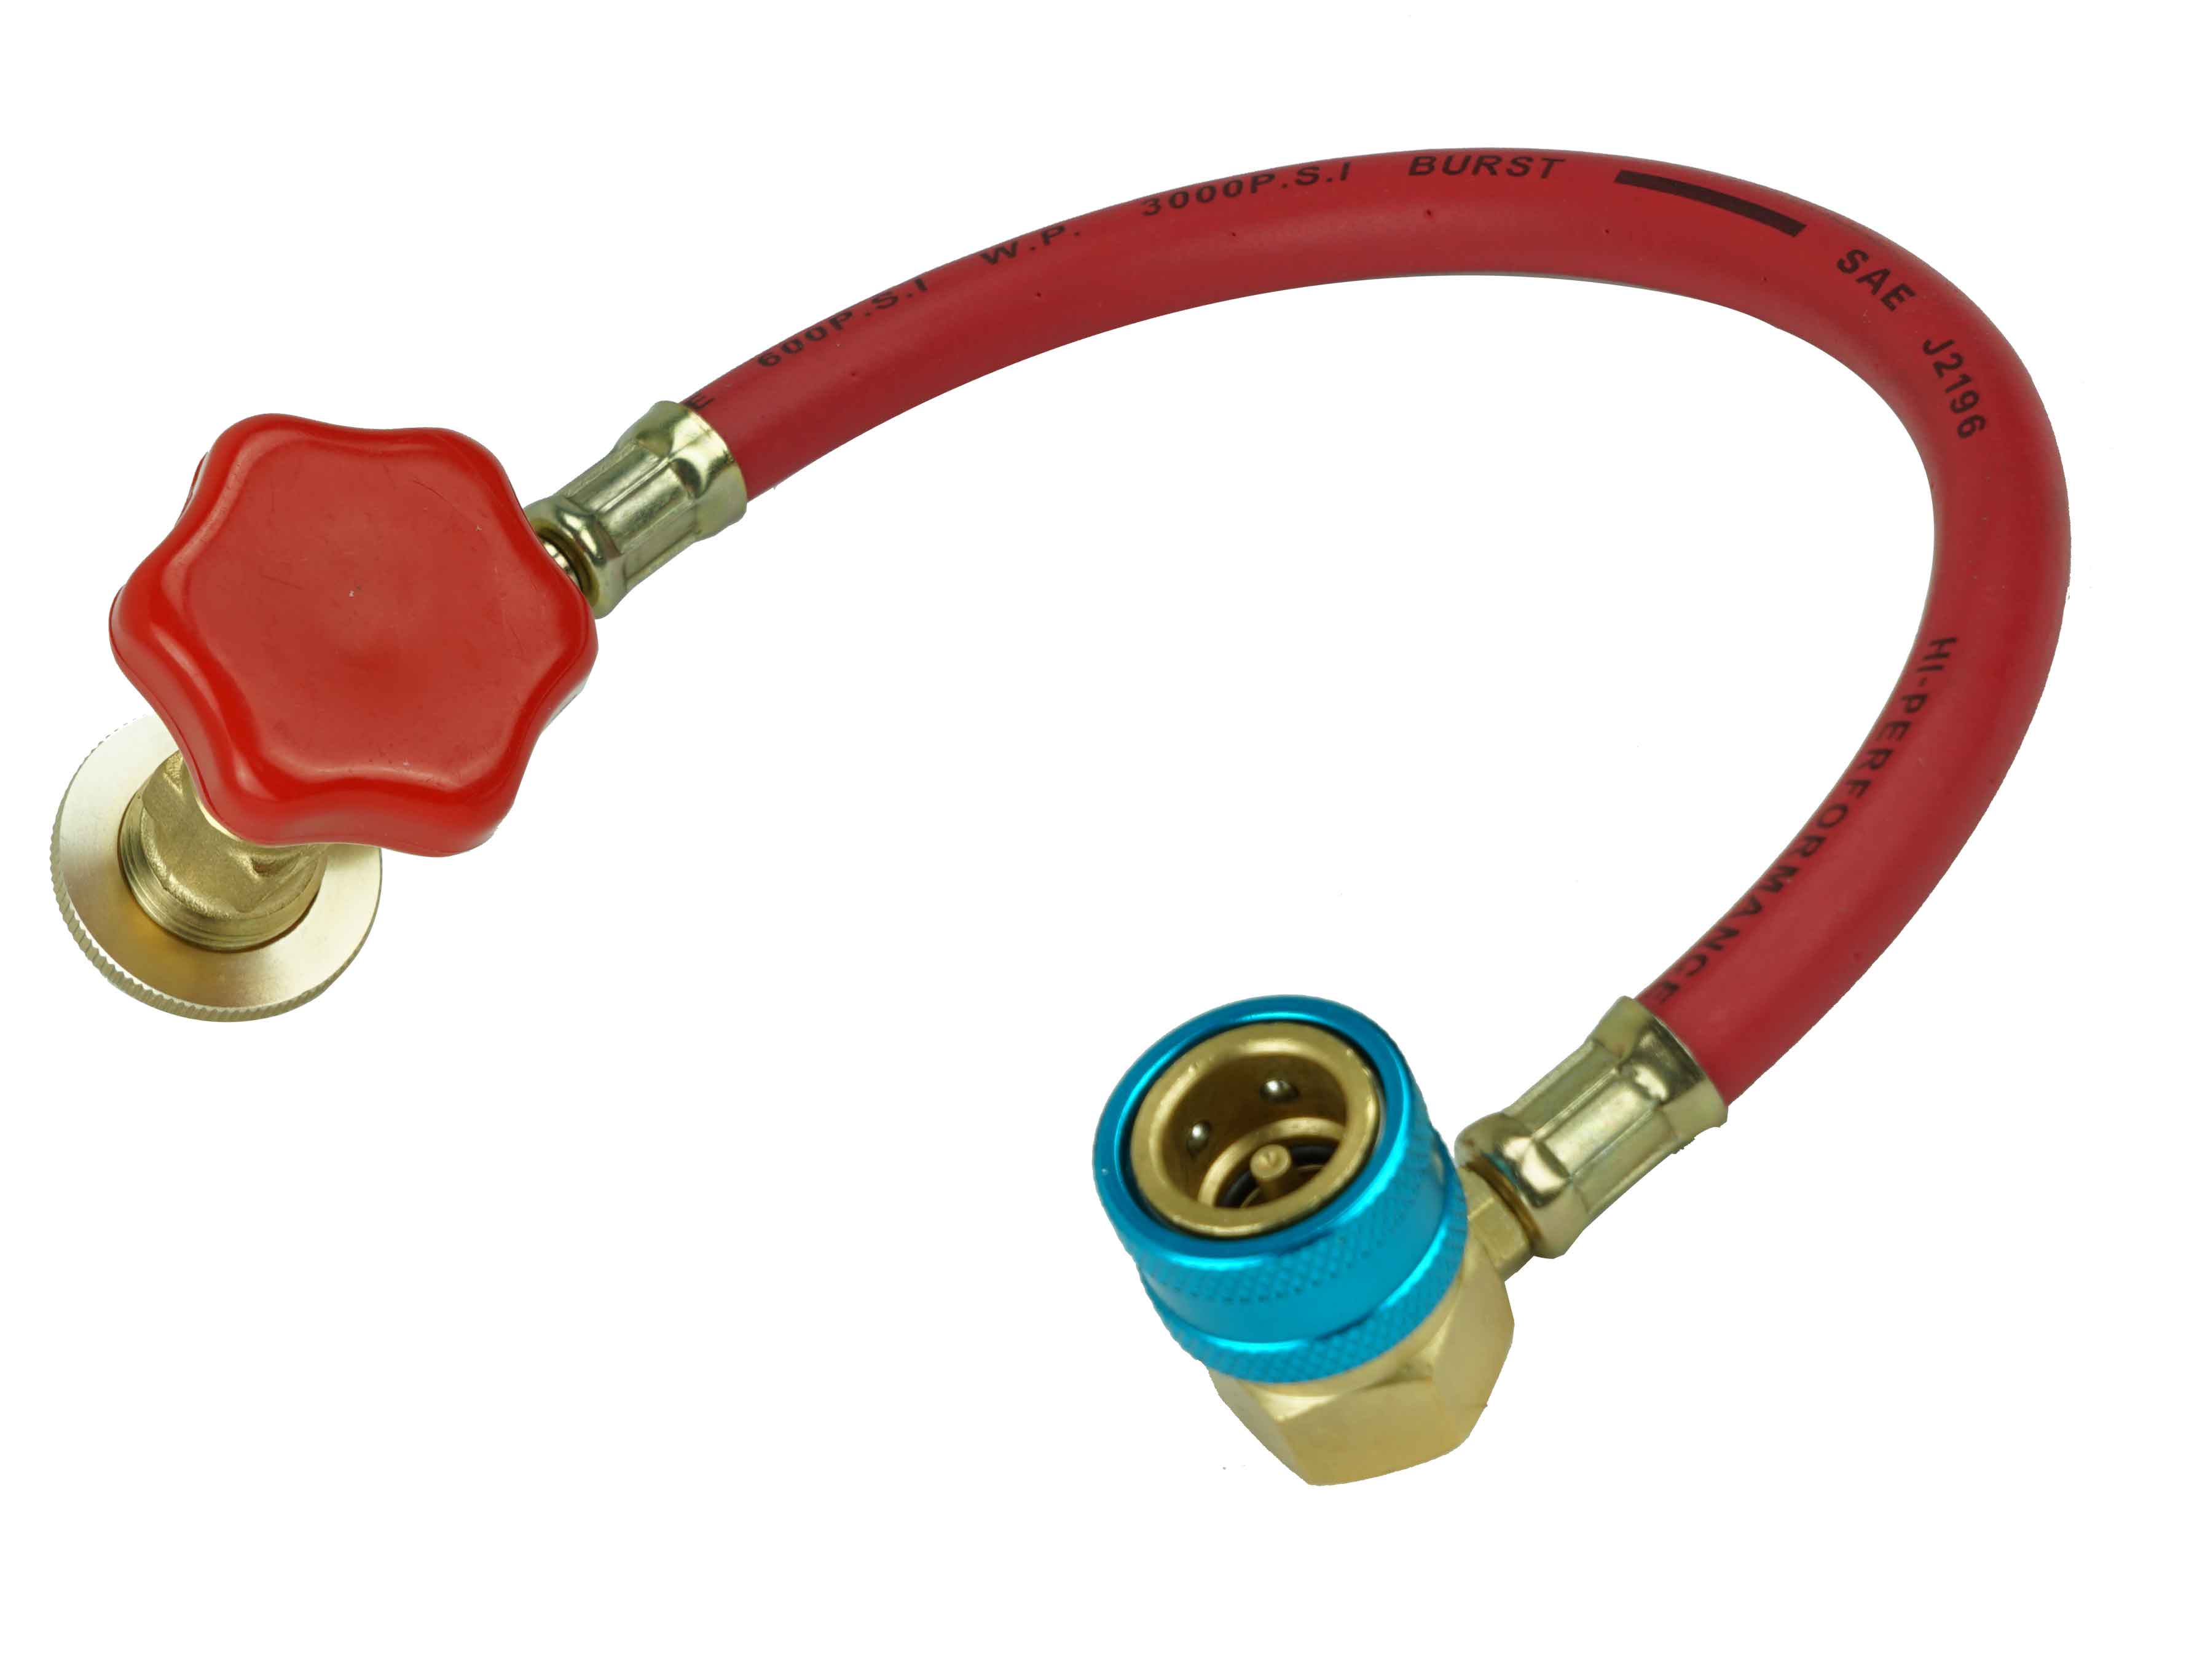 58179 - Gas-charge-kit-with-can-opener-valve-for-1234yf-Gas-can-connection-M14-x-1-25-reverse-screw-threads-Hose-color-is-red-with-1234yf-Quick-Coupler